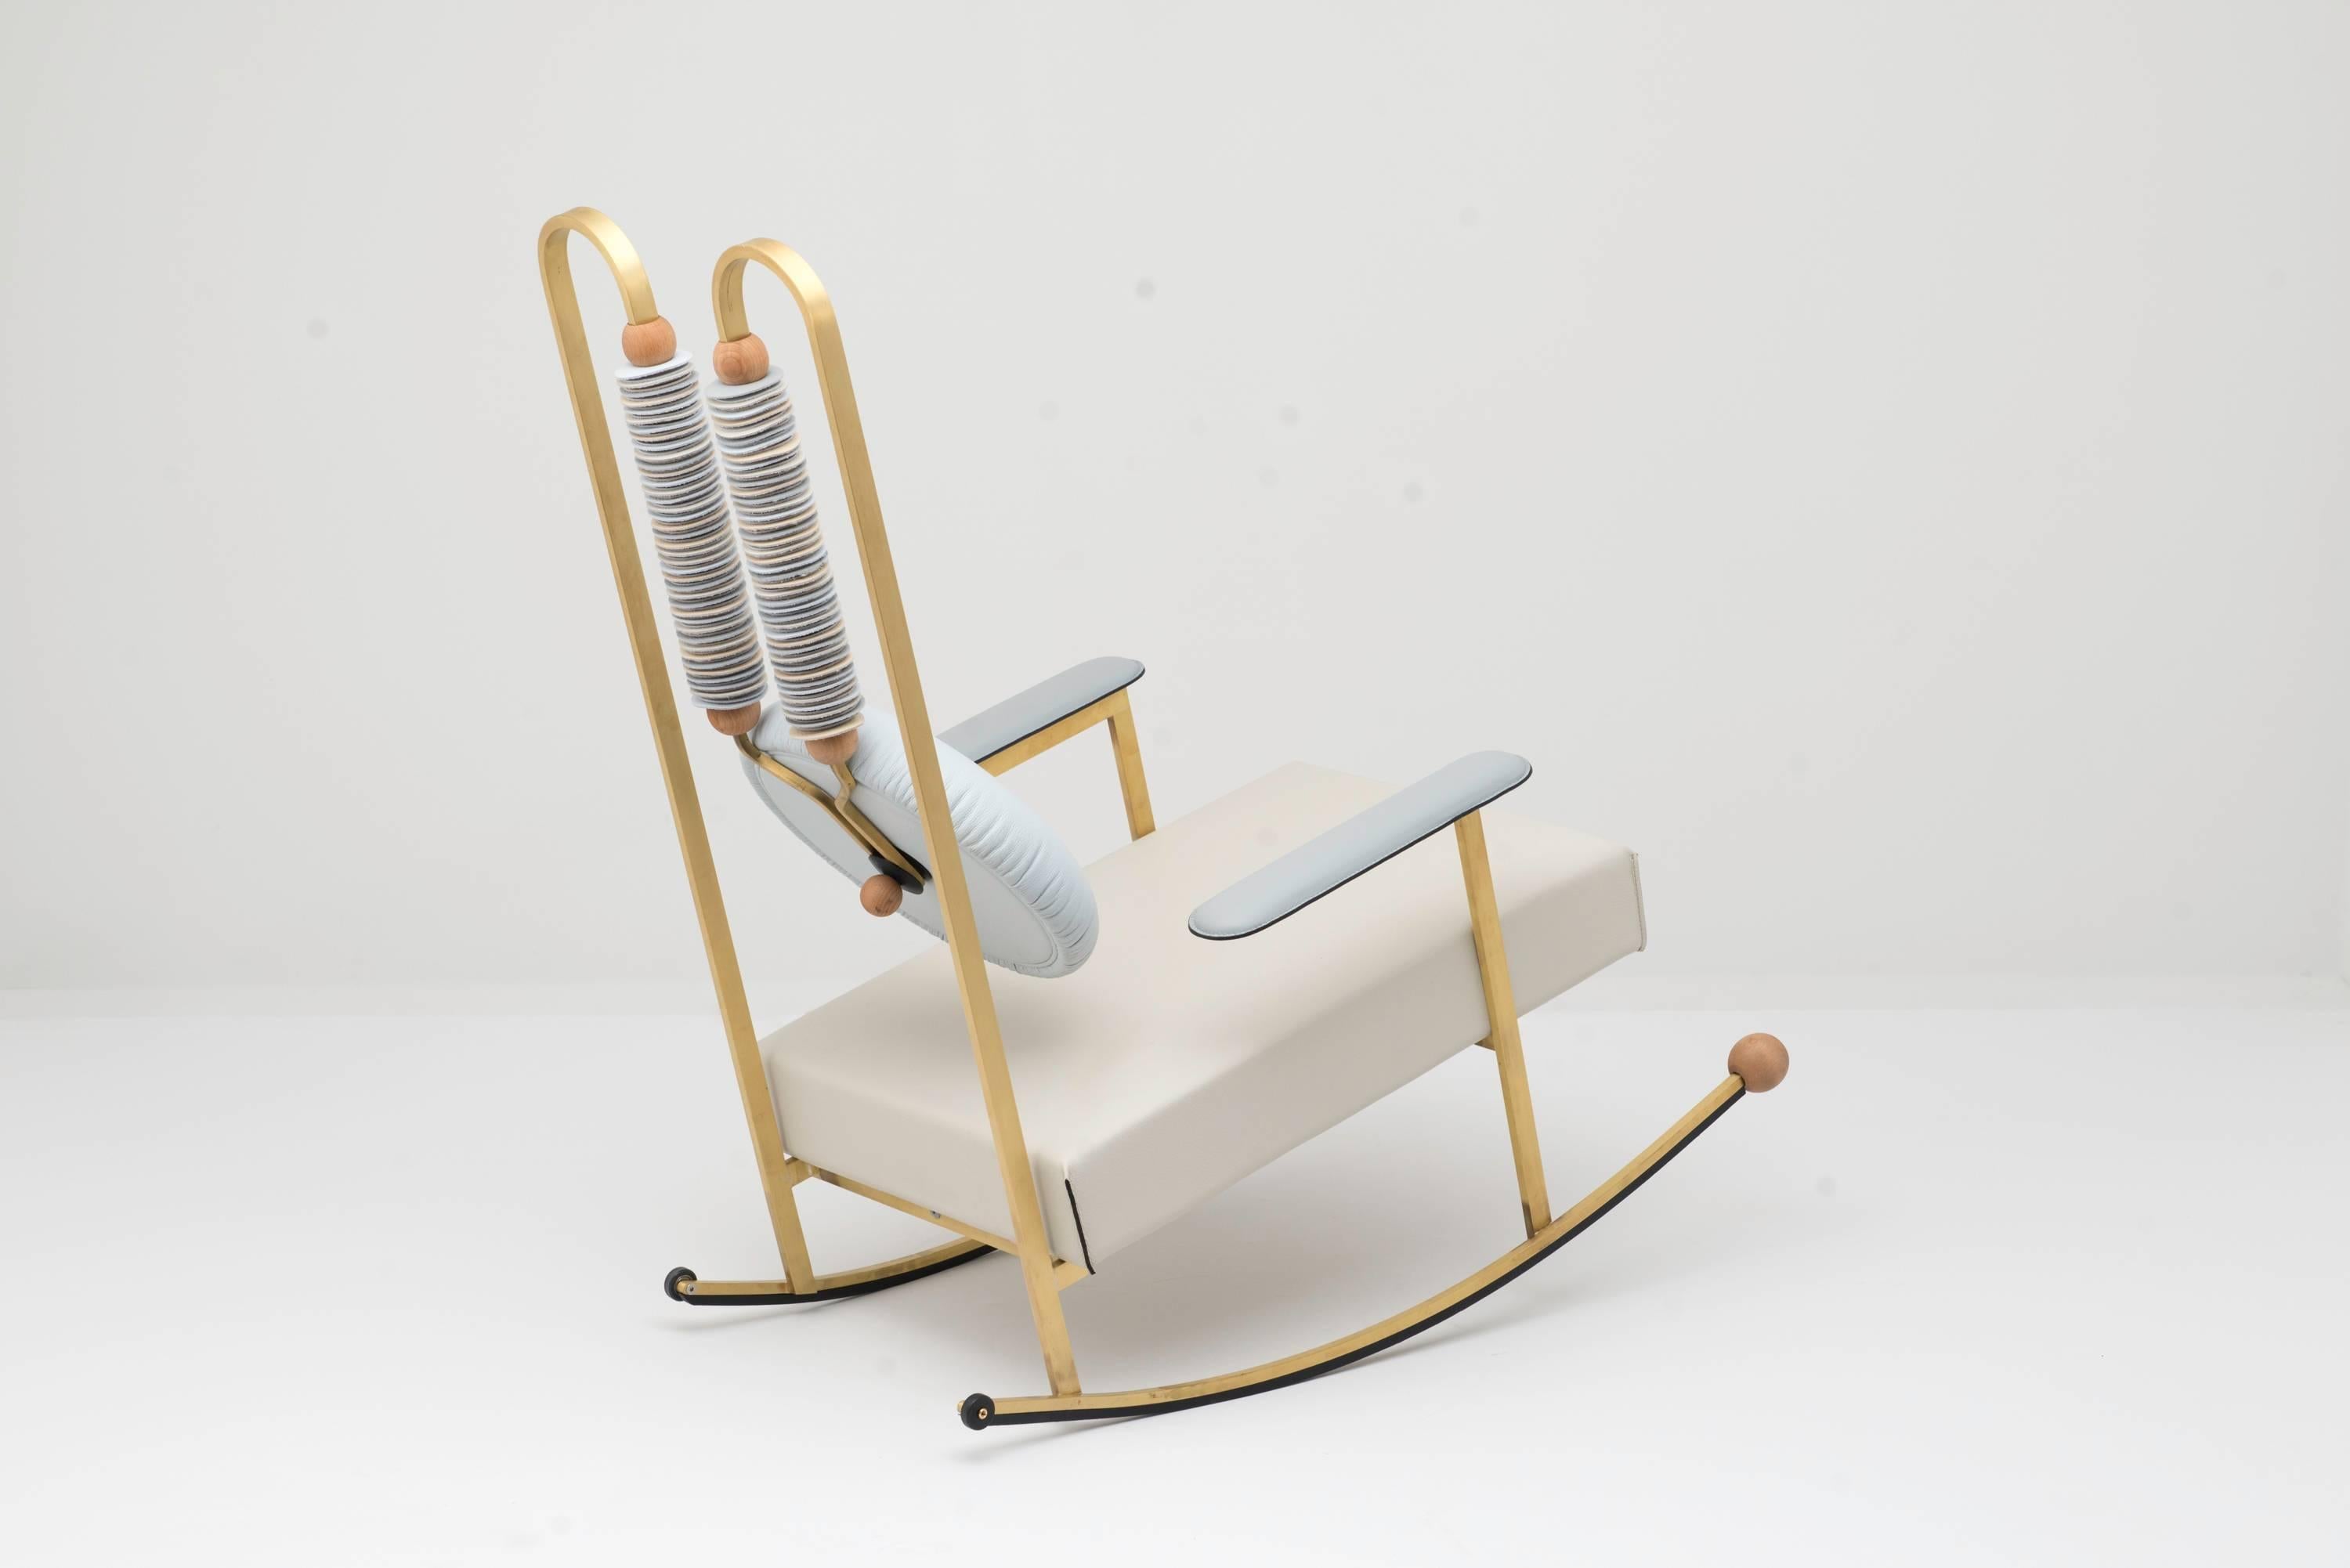 Modern Rulla Leather & Brass Rocking Chair by Mario Milana Handcrafted in Italy